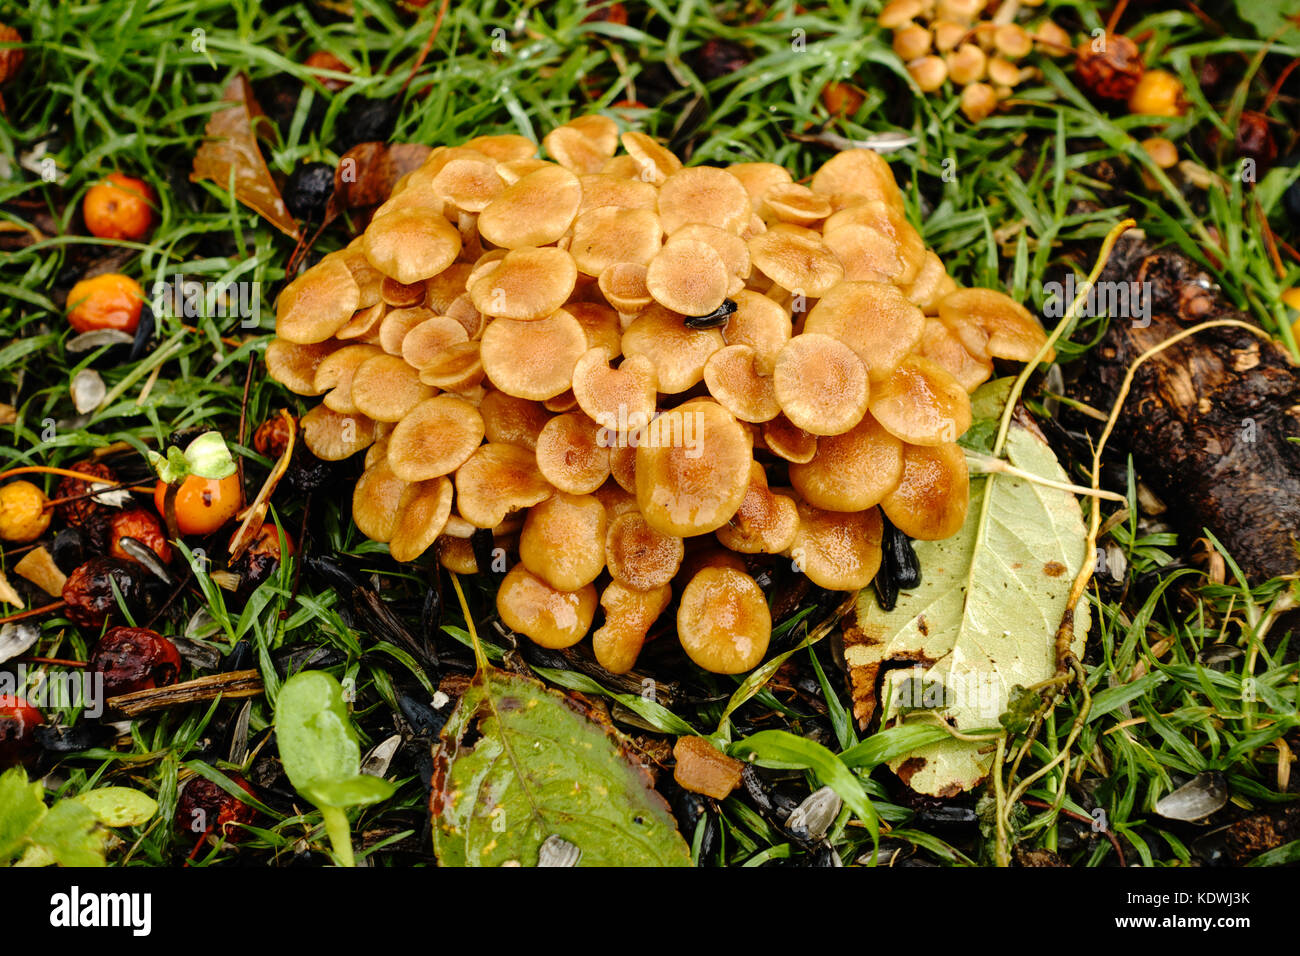 A patch of Honey fungus mushrooms, Armillaria mellea, growing around Crabapple, malus, tree roots in an urban lawn in Oklahoma City, Oklahoma, USA. Stock Photo